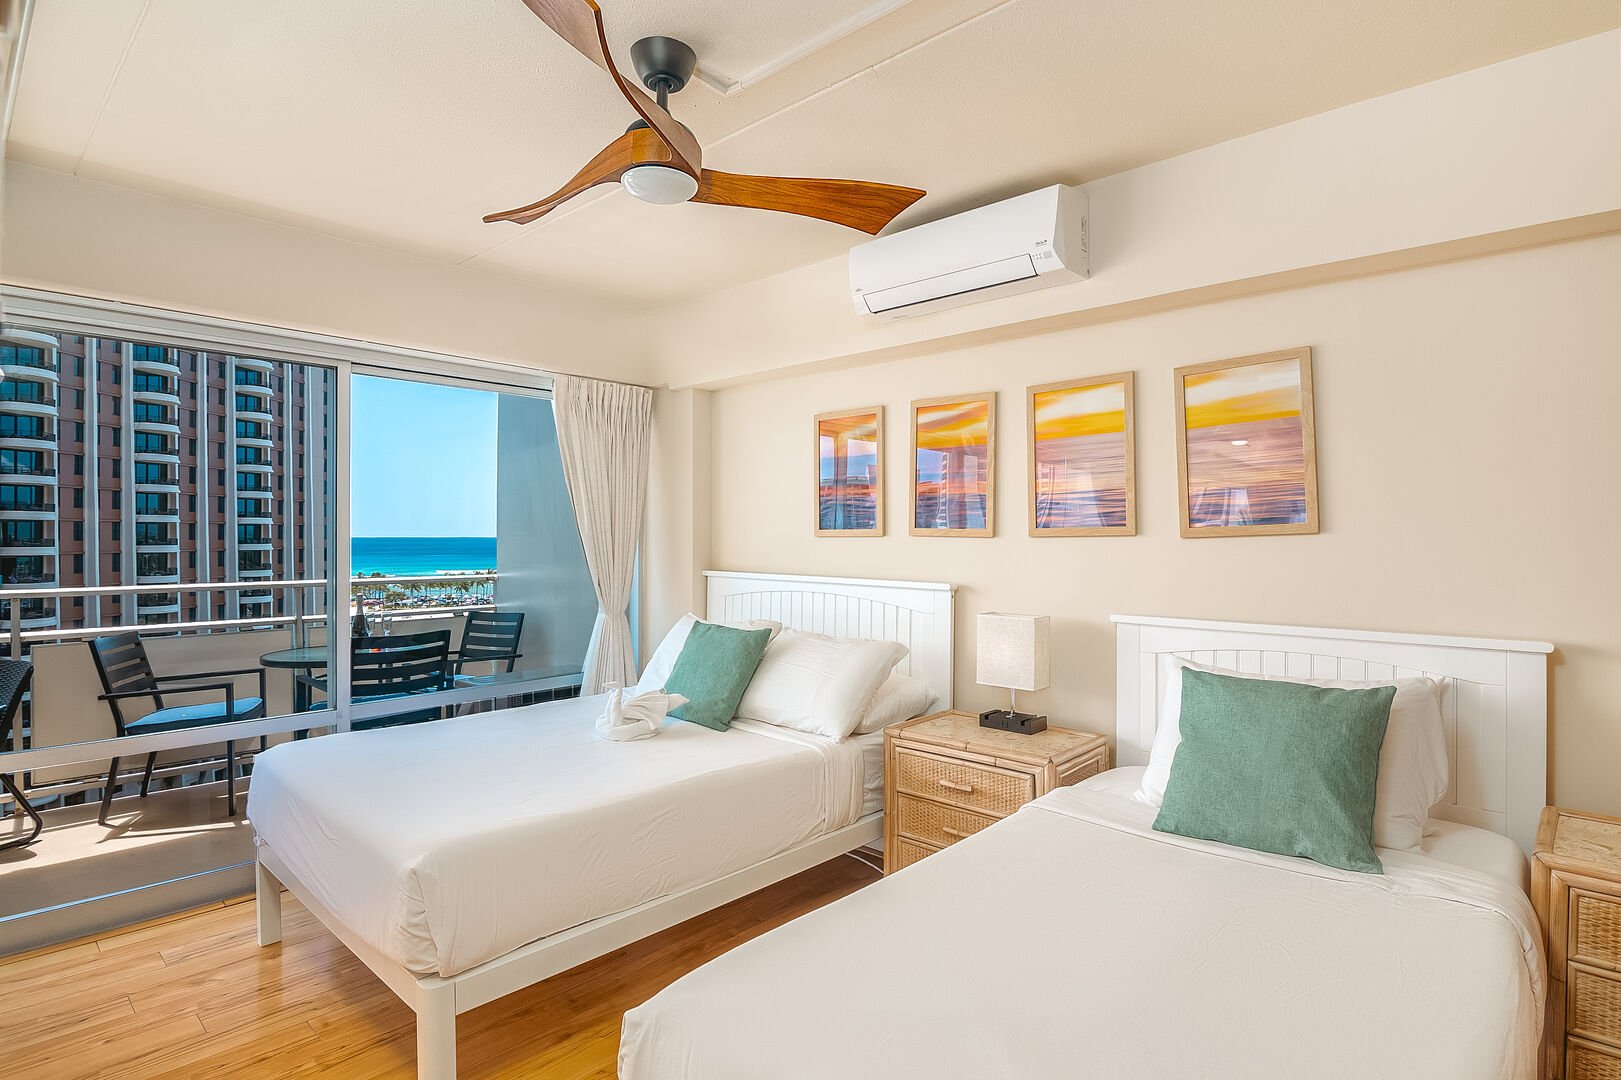 The second bedroom with 1 full-size and 1 twin-size bed, a ceiling fan, split AC, and a beautiful ocean view.